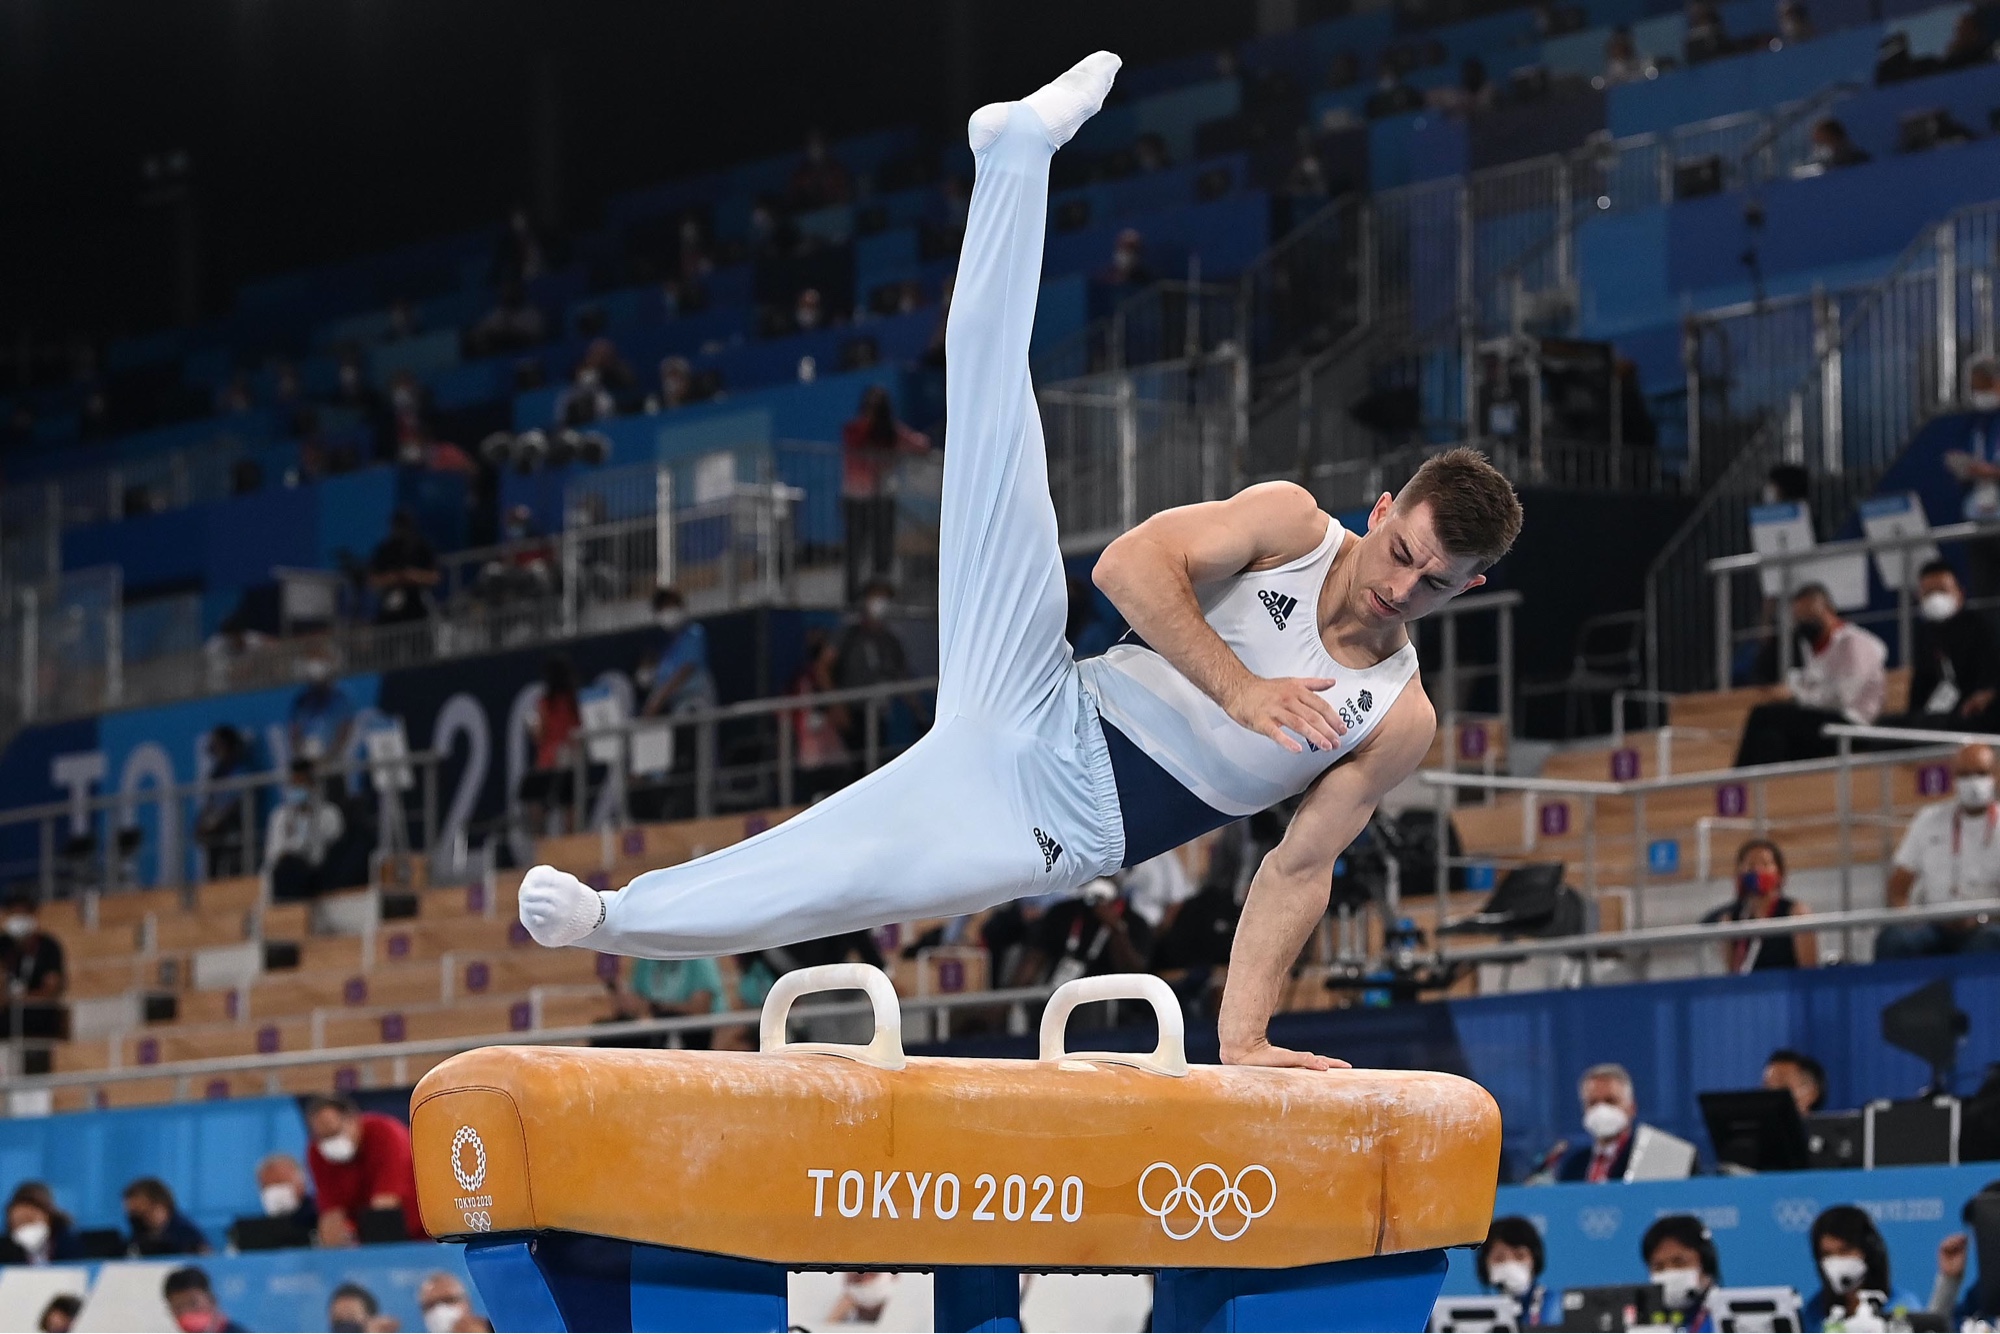 Max Whitlock in the Tokyo 2020 Olympic Pommel Horse Final